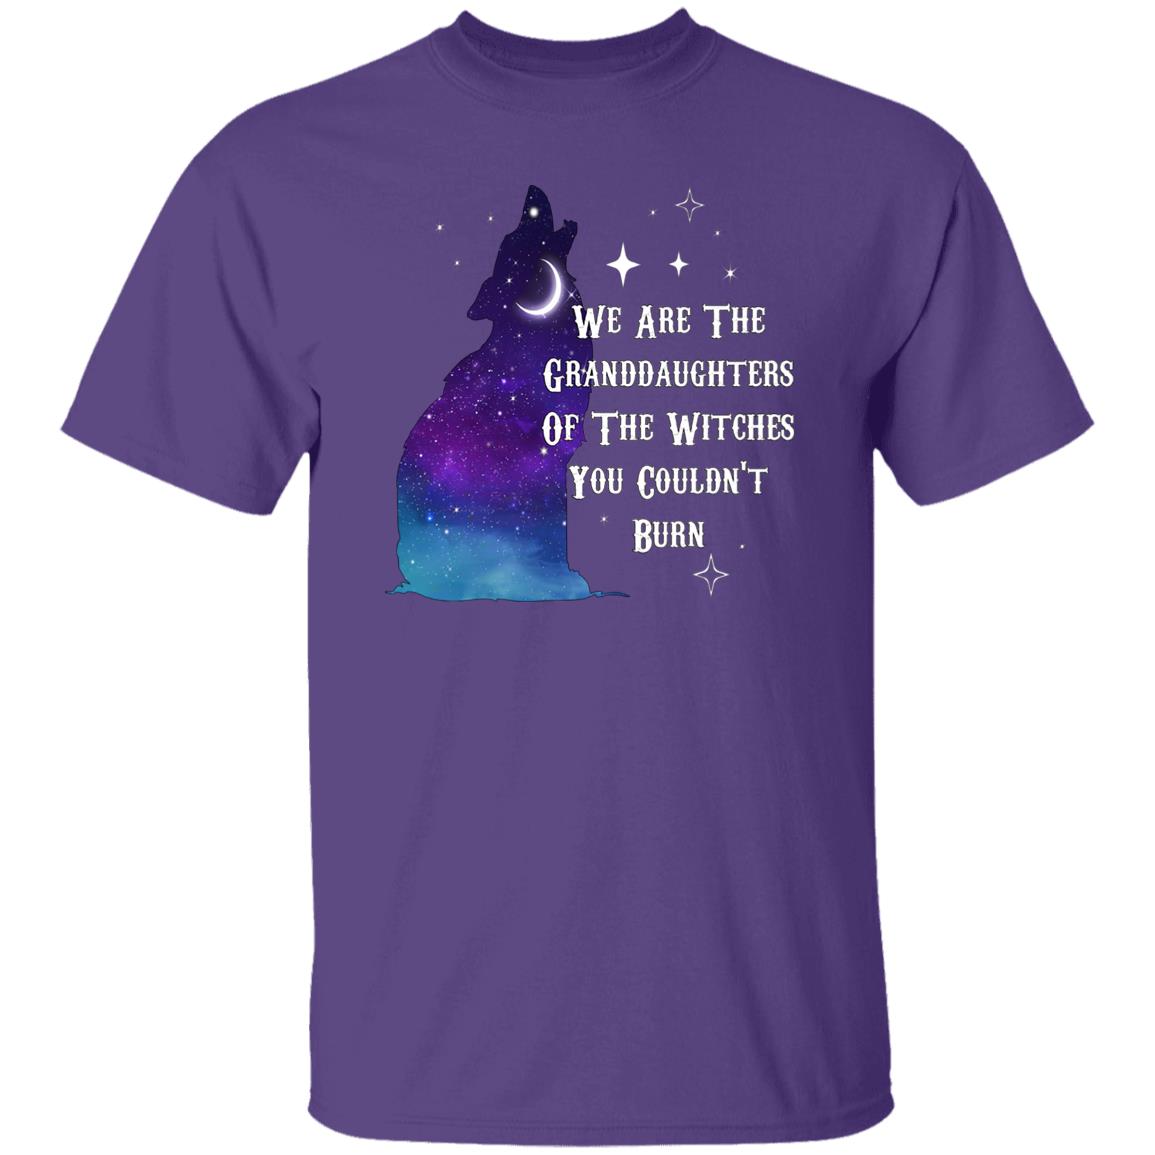 Granddaughters Of Witches T-Shirt